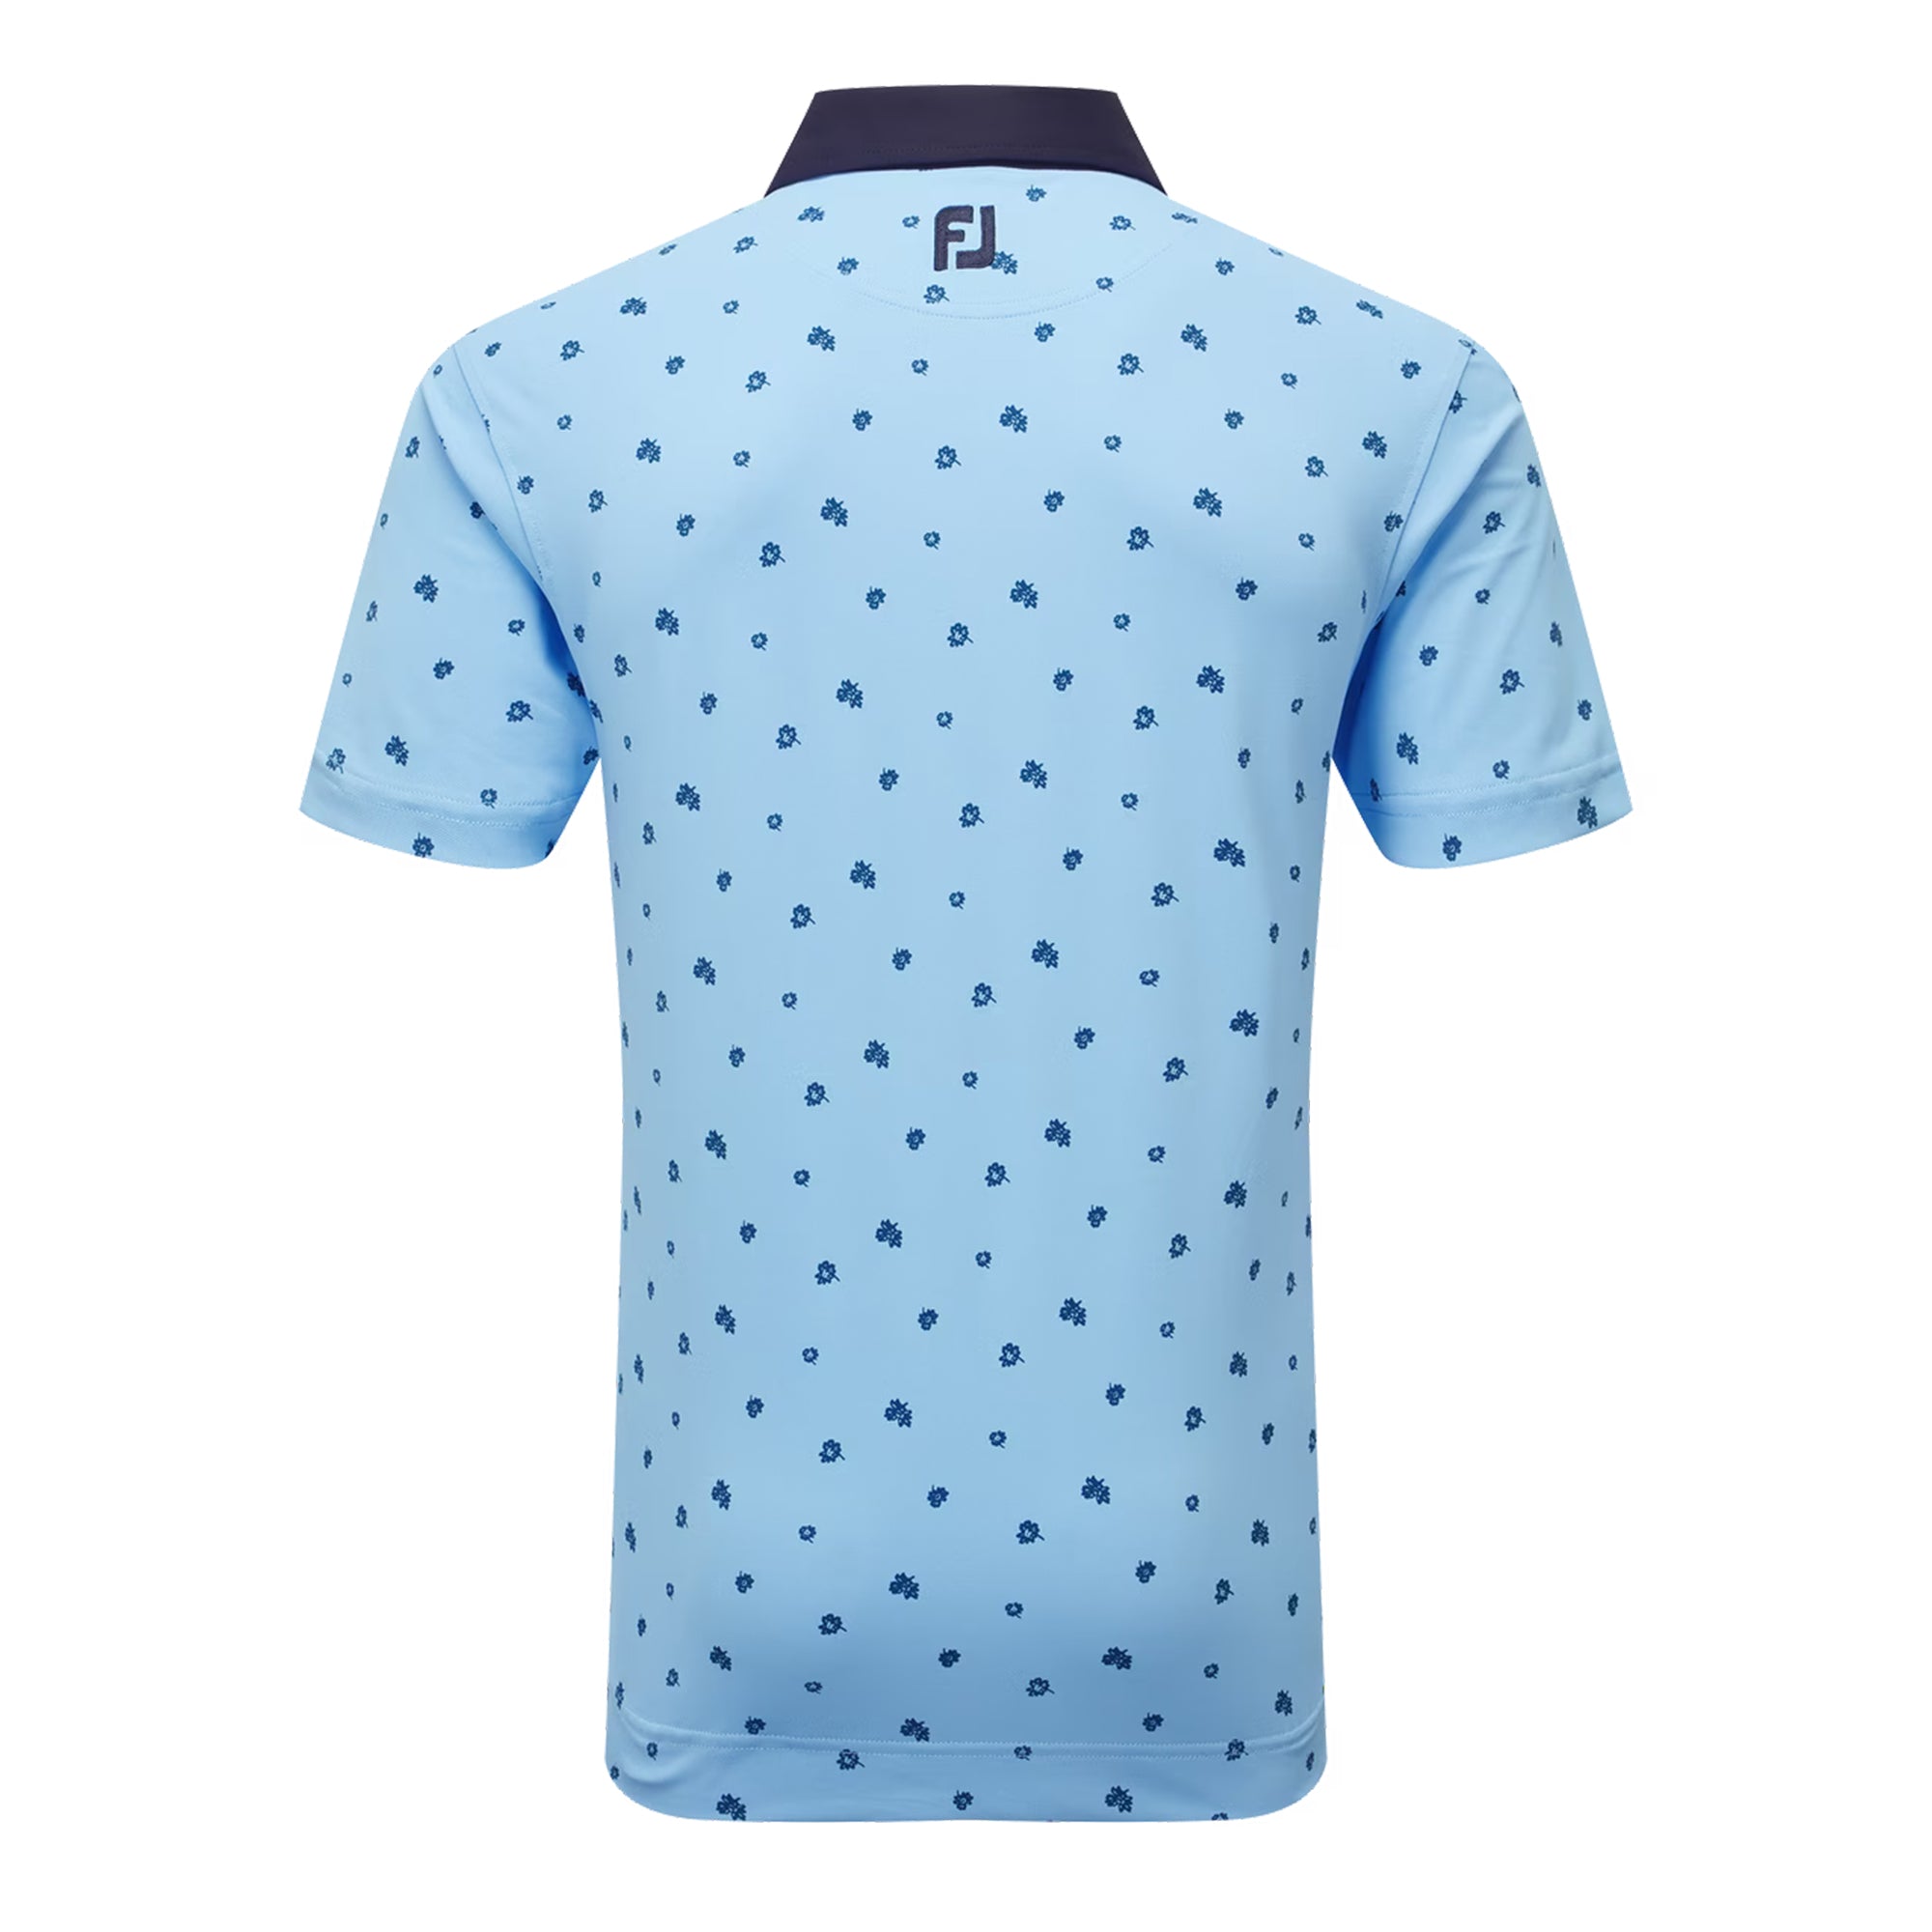 FootJoy Scattered Floral Pique Polo